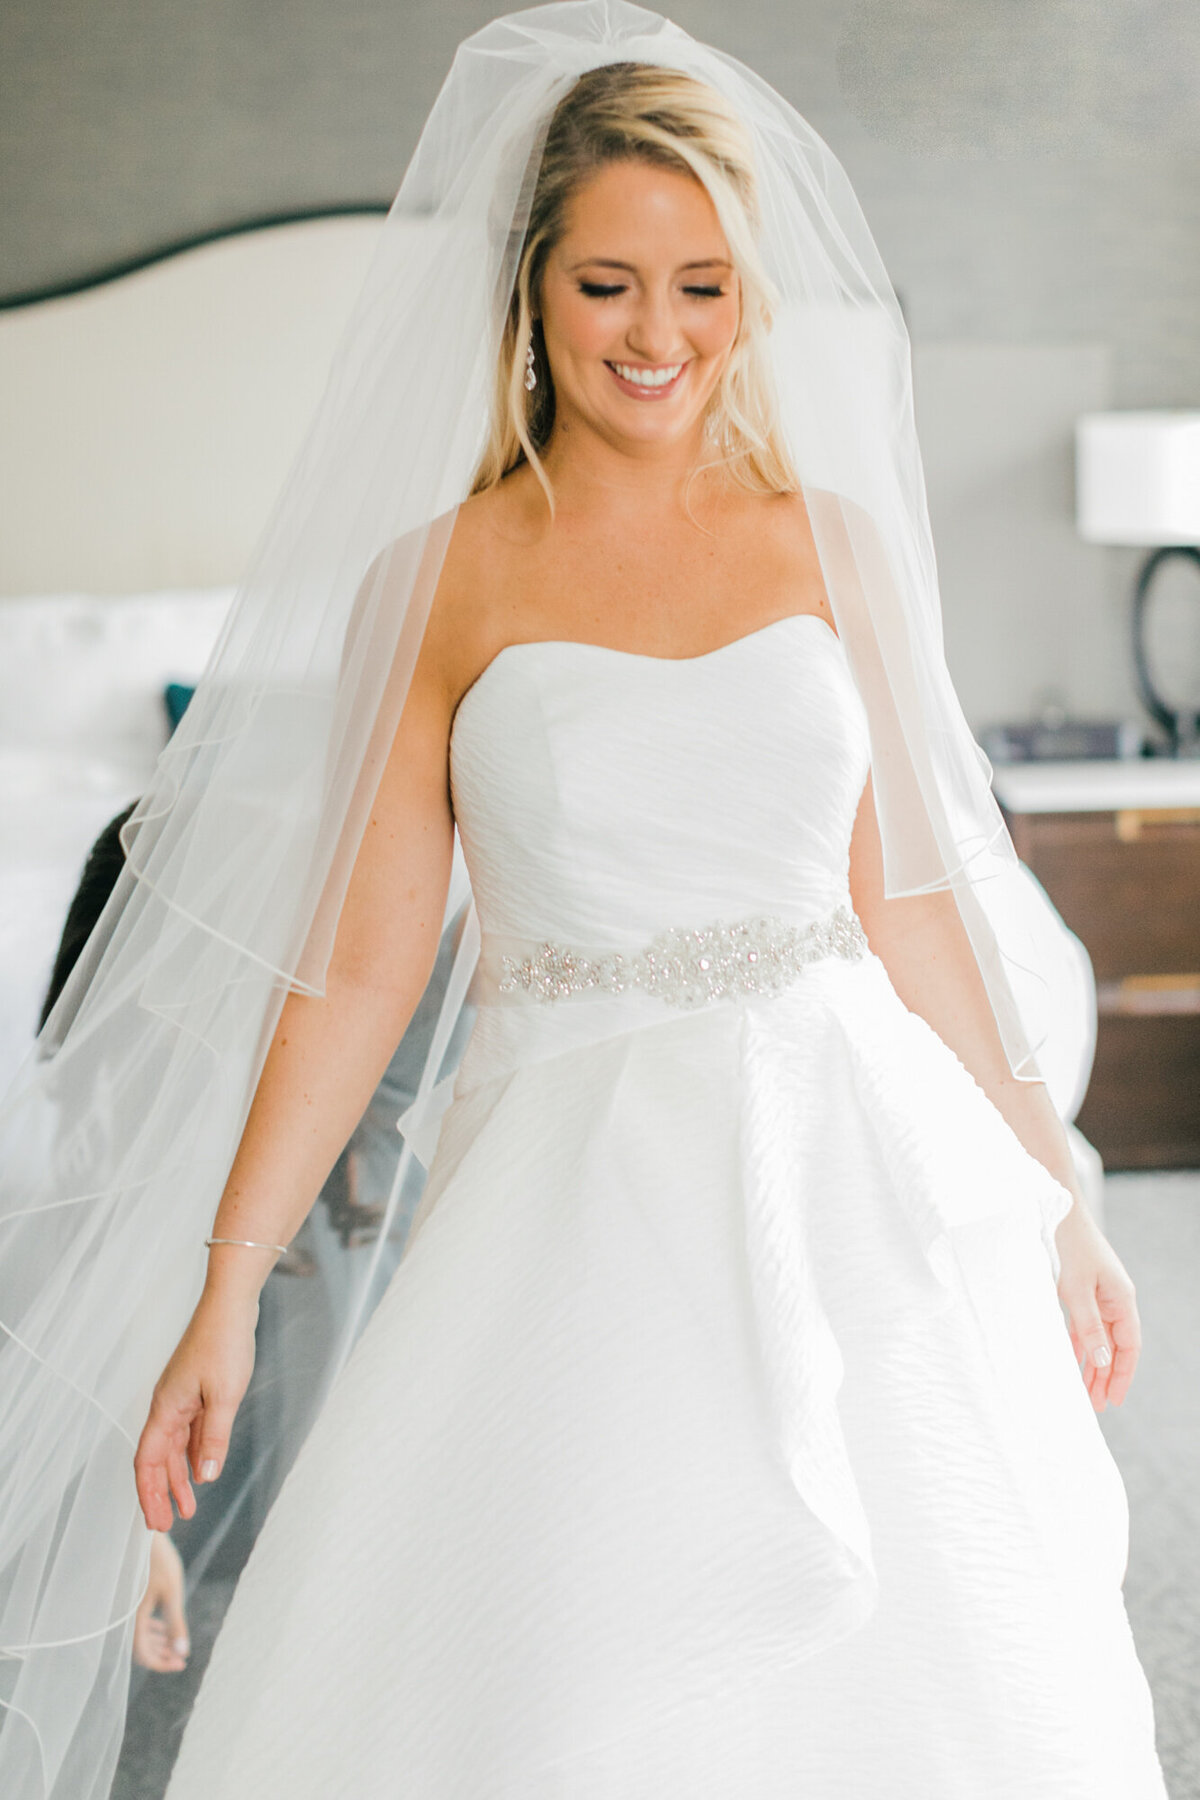 A beautiful bride smiles as she gets ready for her wedding day in Chicago